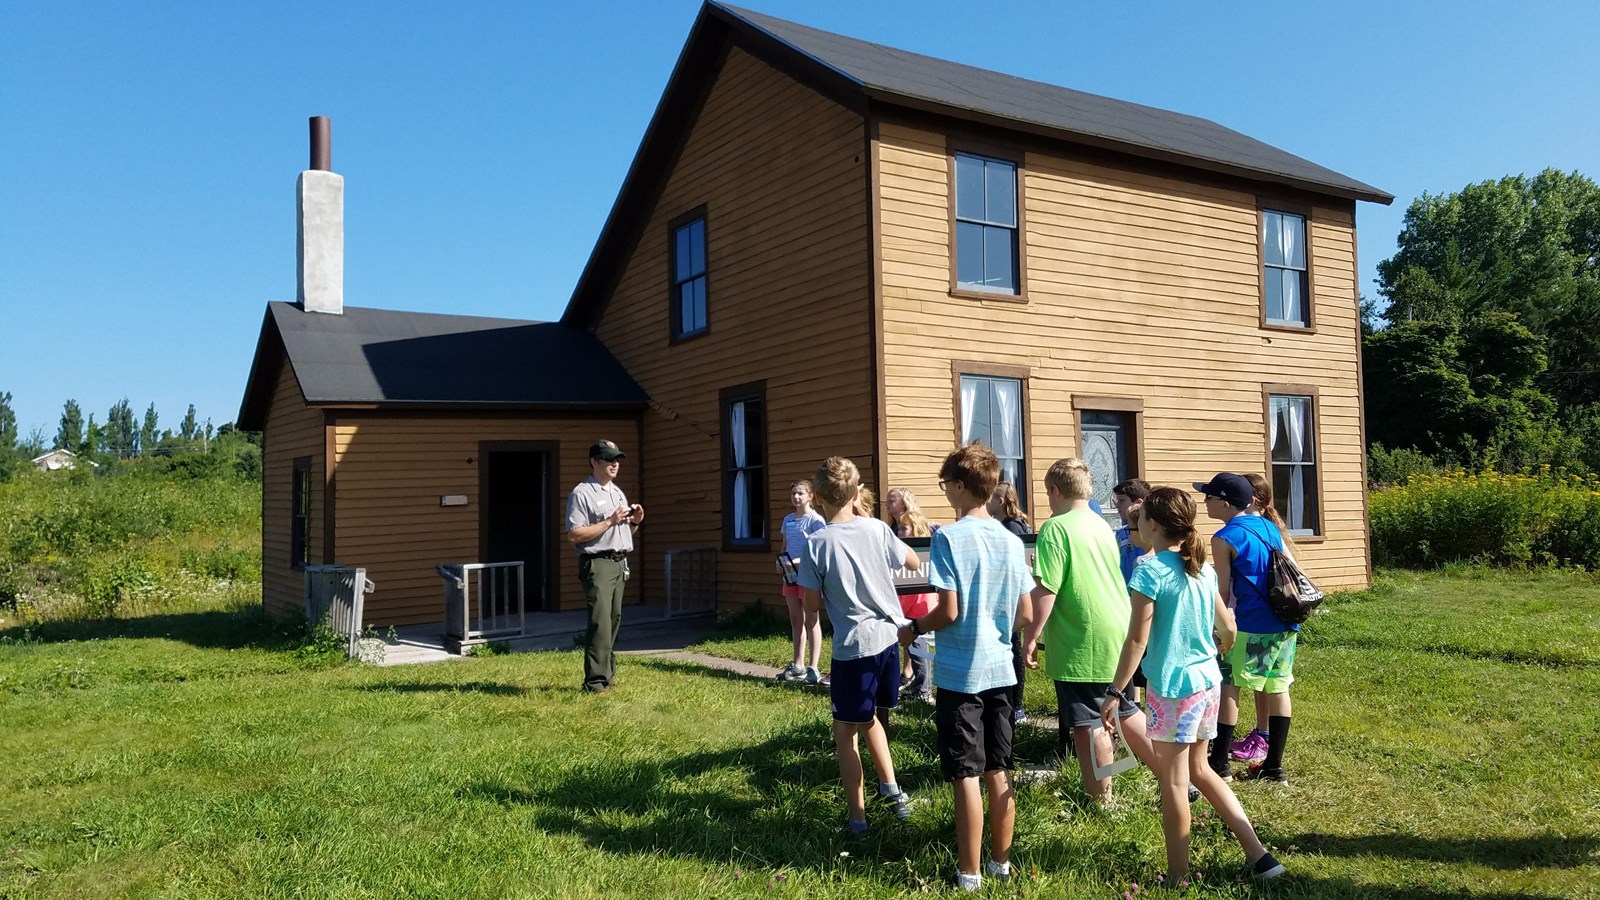 A park ranger speaks to a group of kids in front of a company house.